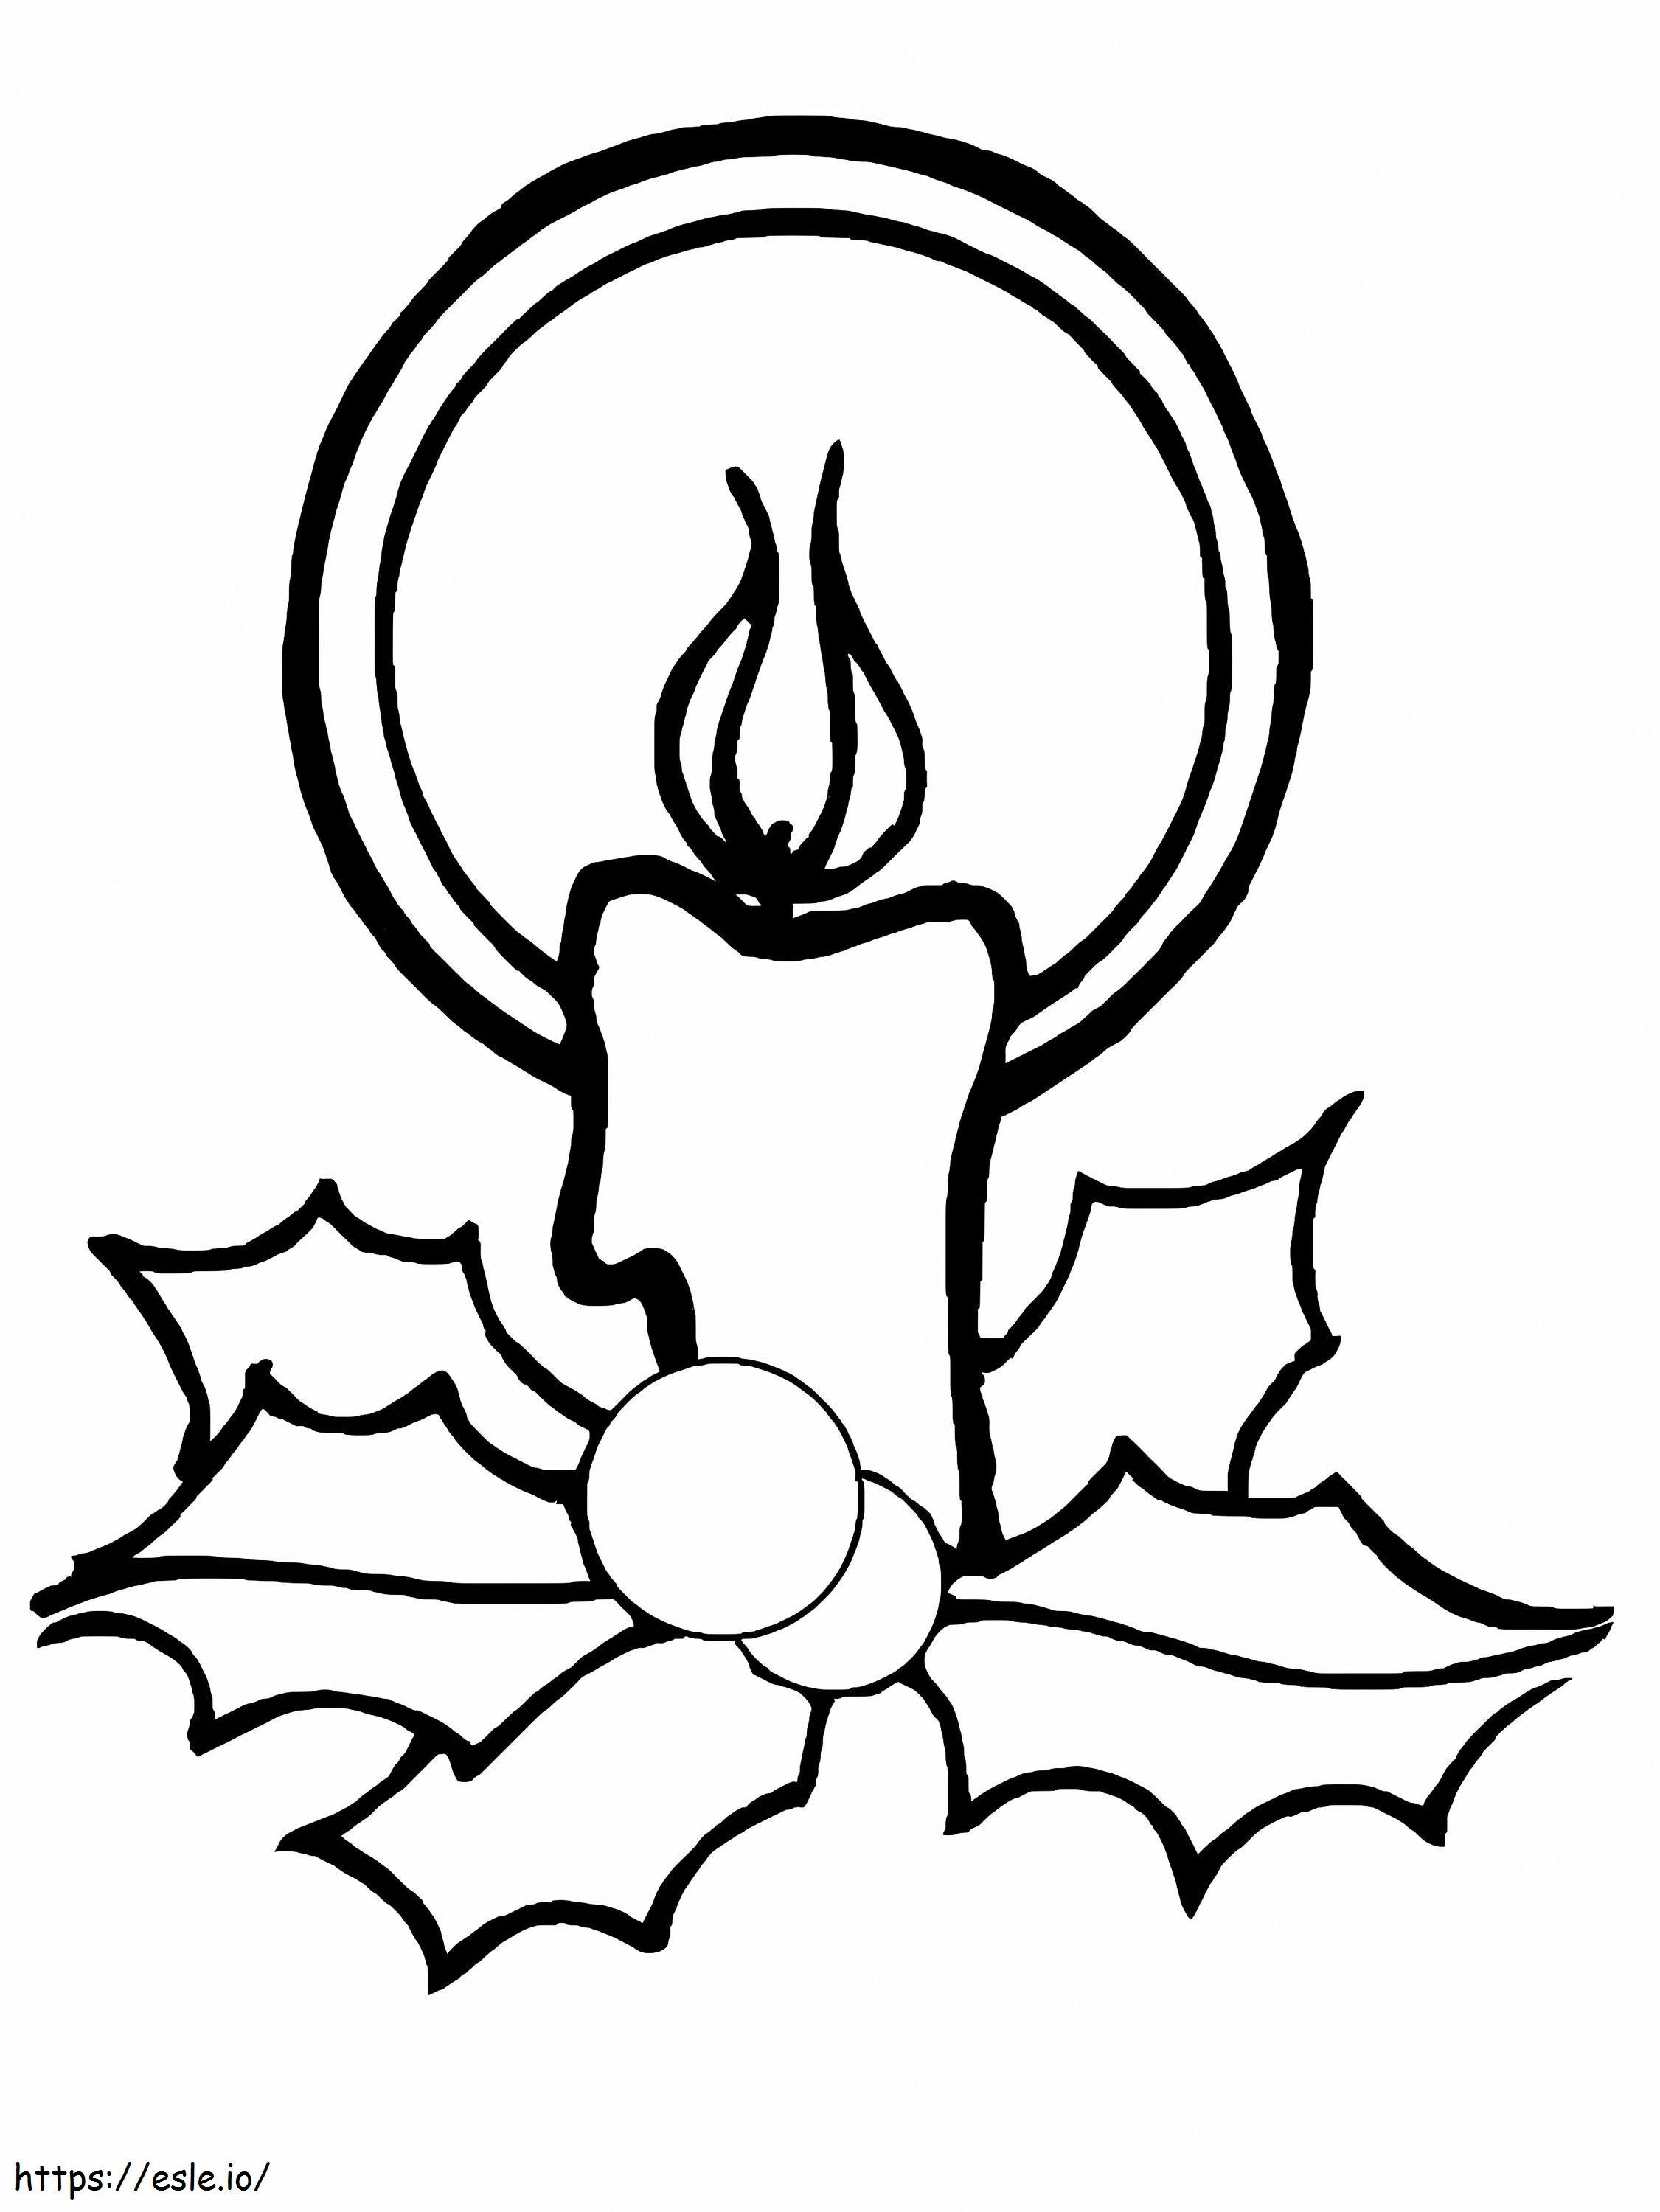 Christmas Candle 2 coloring page